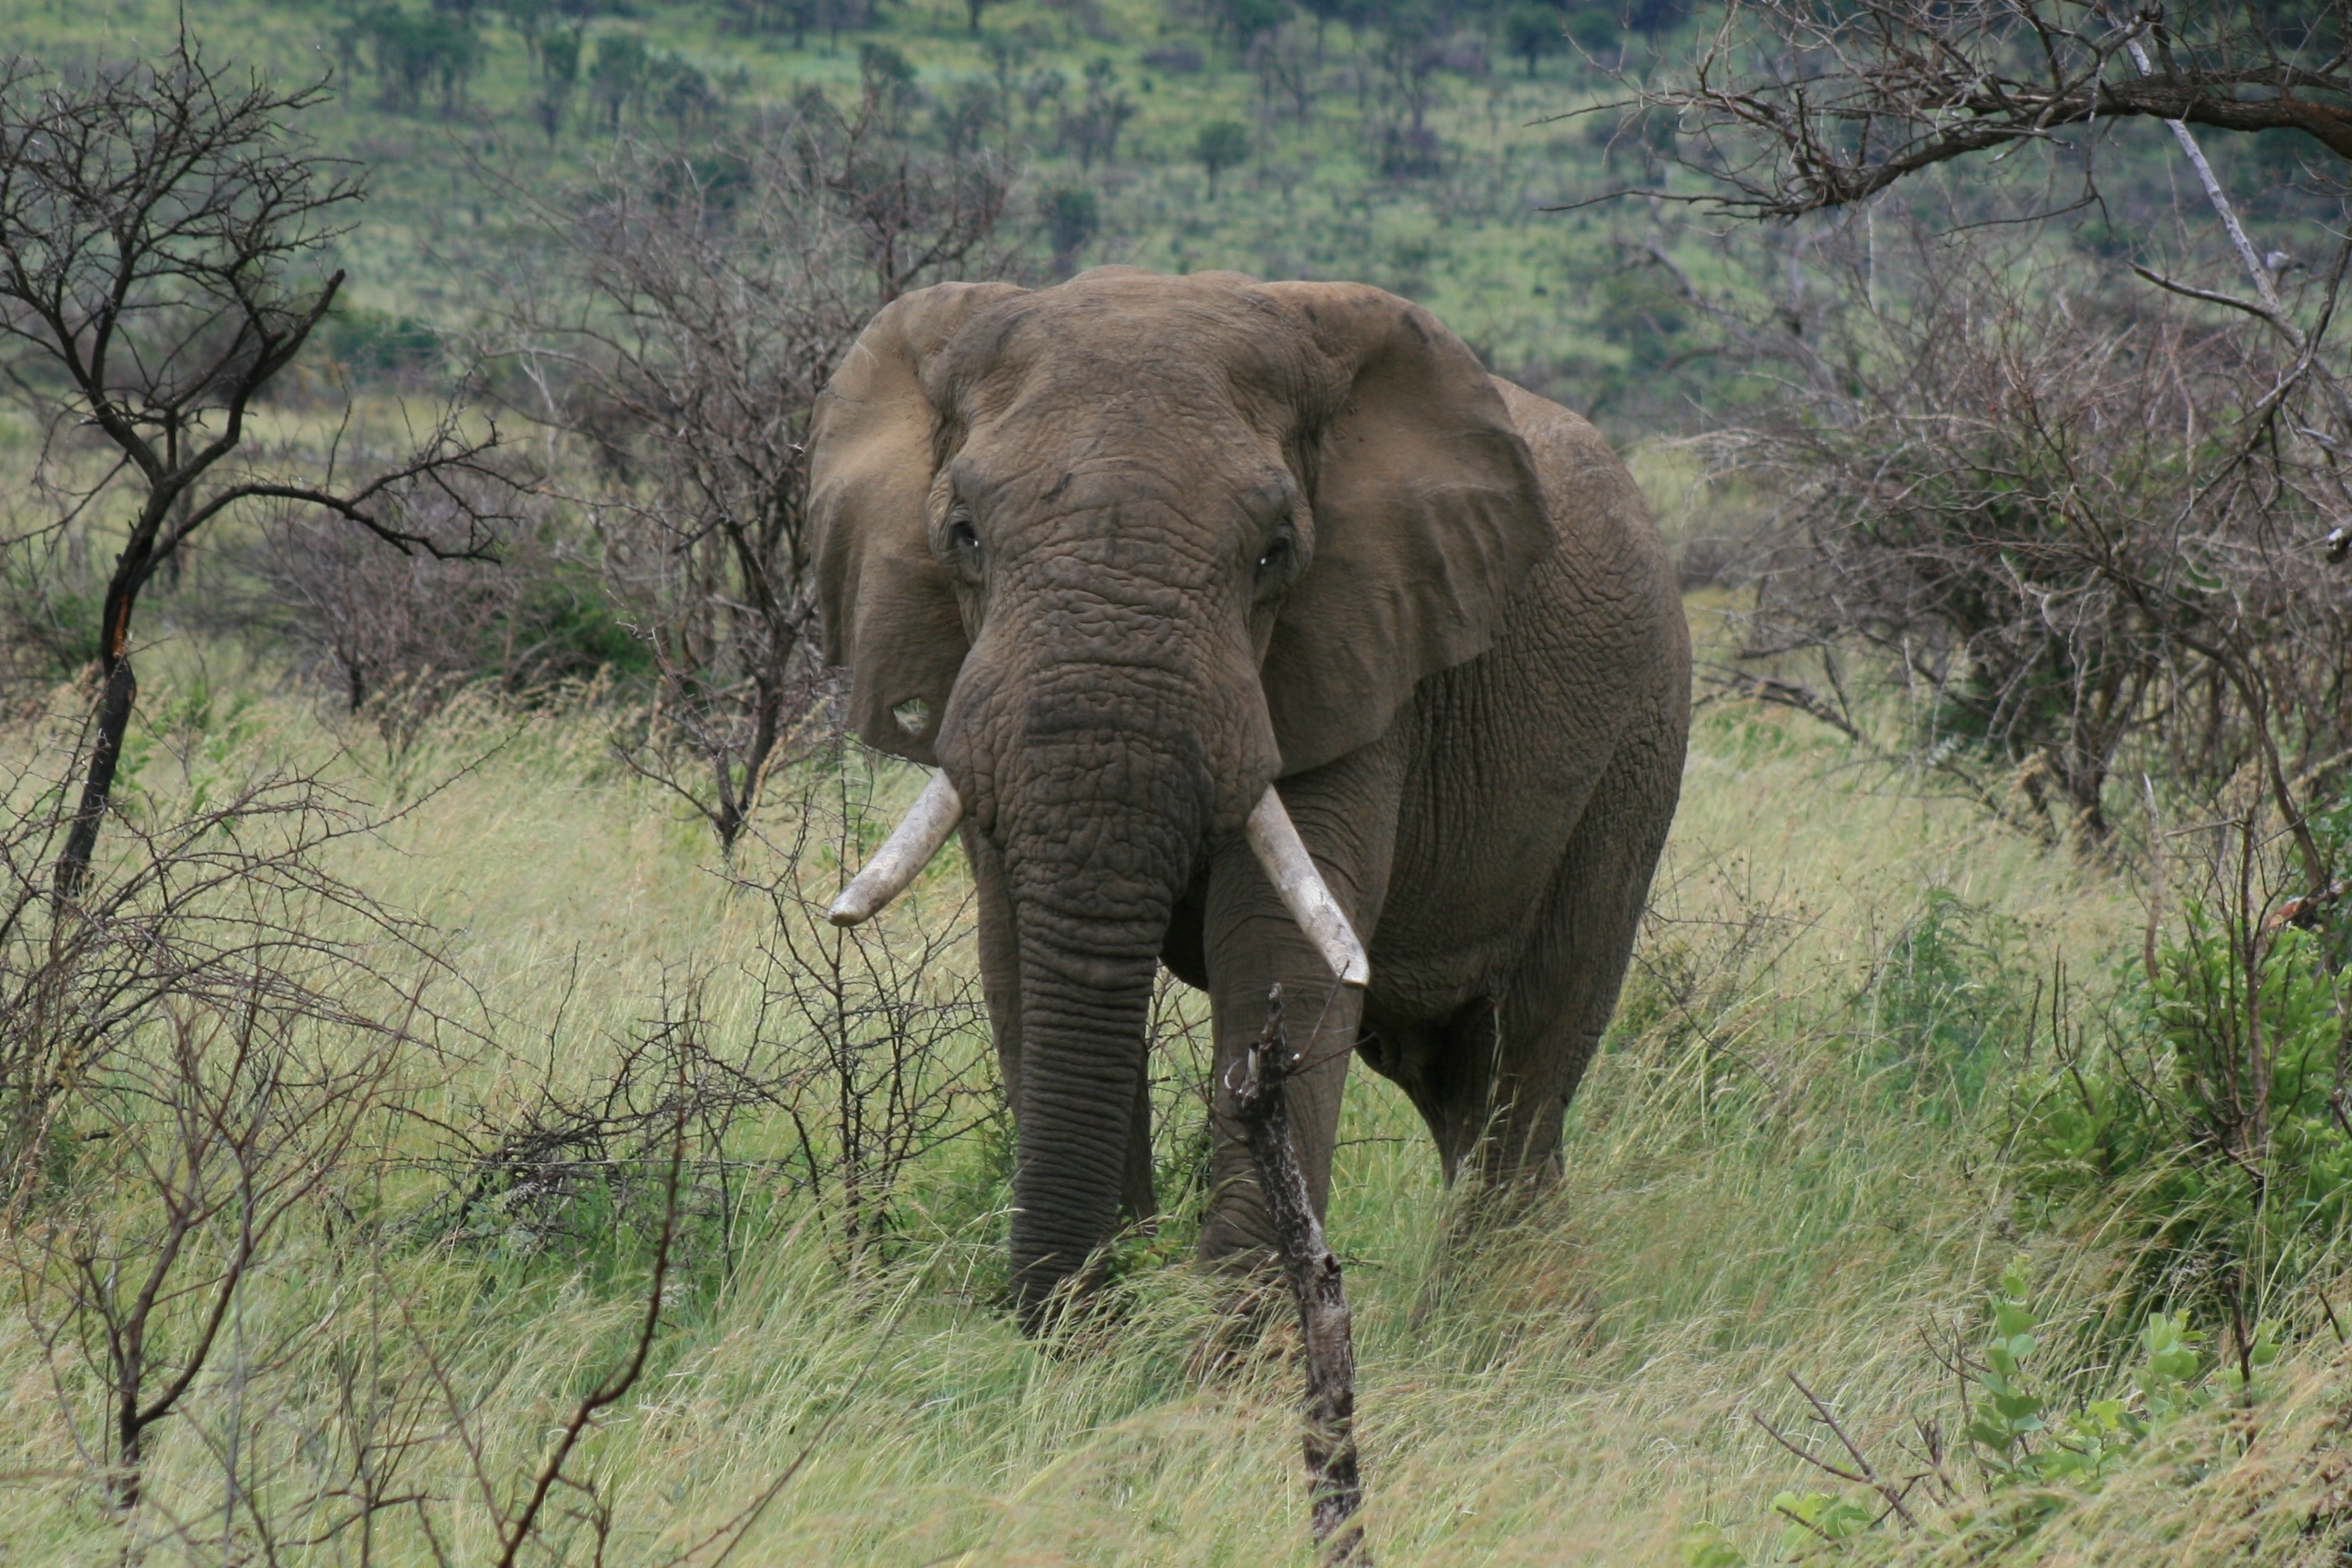 brown elephant on grass field during daytime